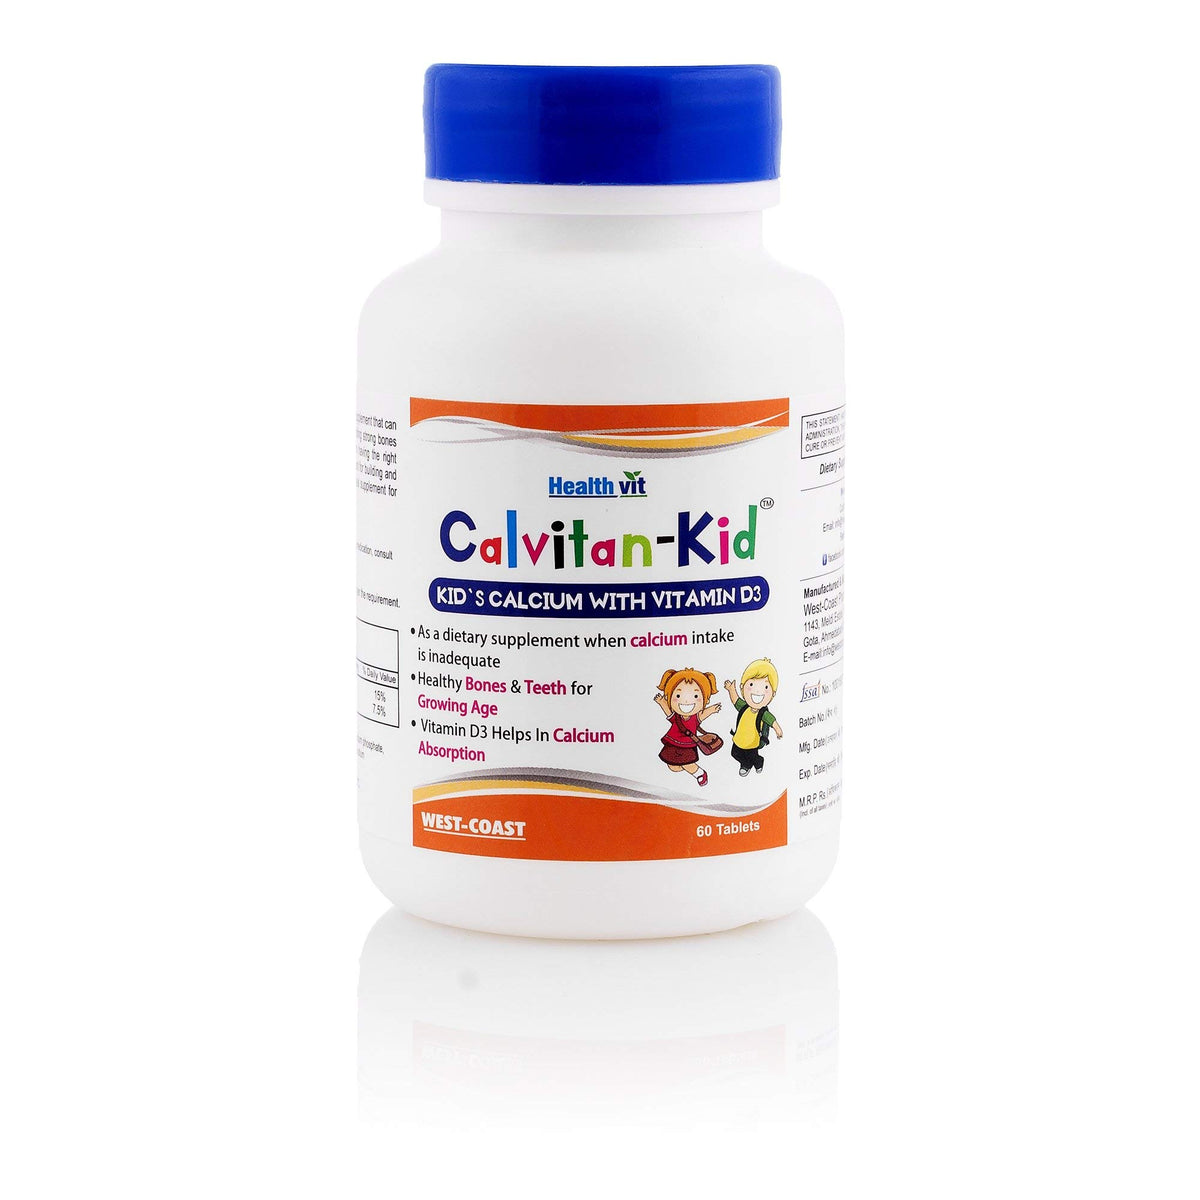 Healthvit Kid's Calcium with Vitamin D No Sugar Chewable Tablets | Promotes Bone Health and Growth | Idea Supplement For Kid's Growing Age | 100% RDA - 60 Tablets